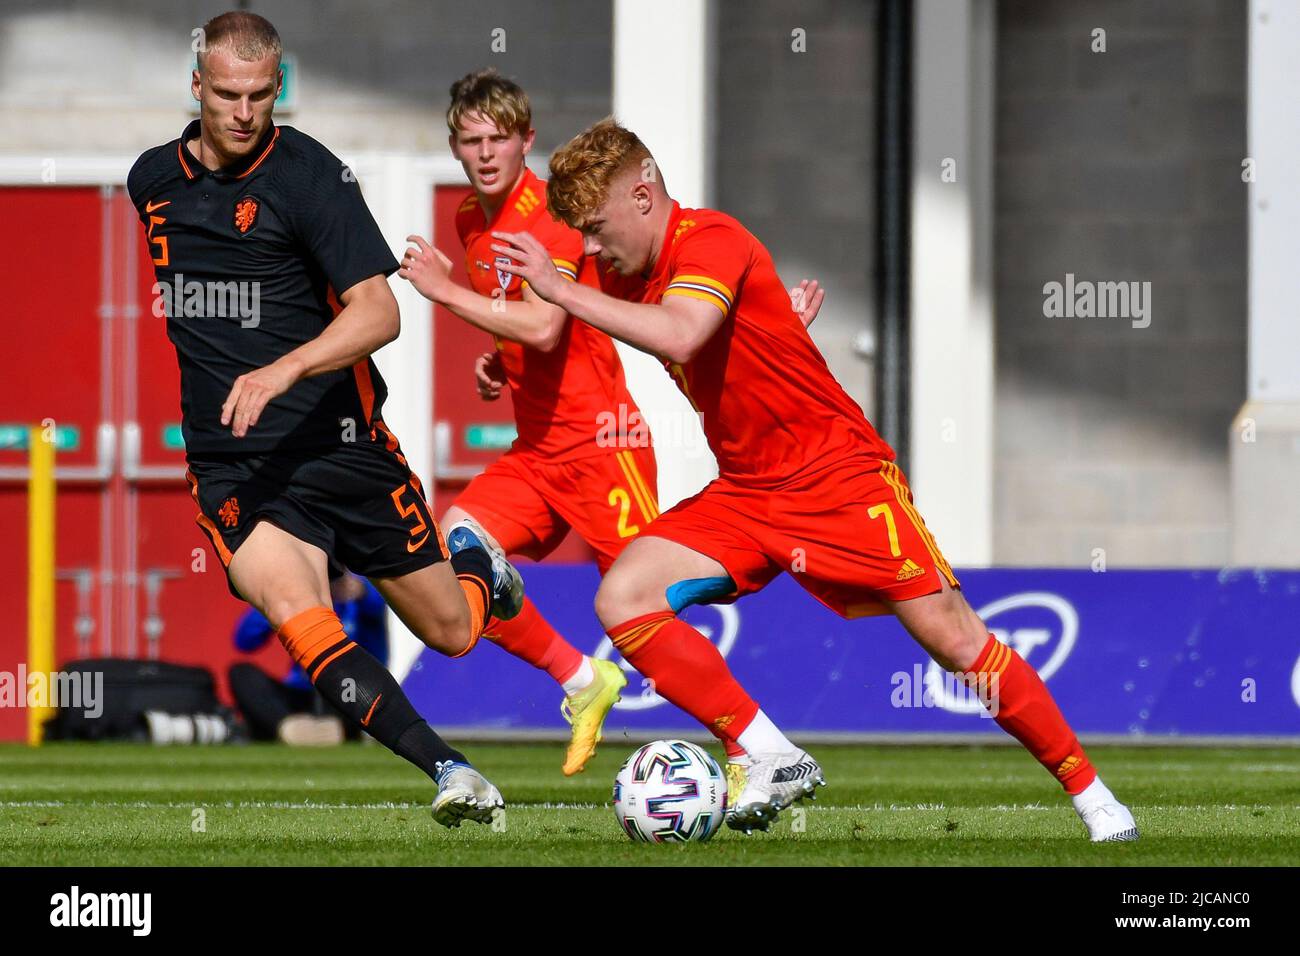 Llanelli, Wales. 11 June, 2022. Samuel Pearson of Wales U21 vies for possession with Mitchel Bakker of Netherlands U21 during the UEFA European Under-21 Championship Qualifier Group E match between between Wales U21 and Netherlands U21 at Parc y Scarlets in Llanelli, Wales, UK on 11, June 2022. Credit: Duncan Thomas/Majestic Media. Stock Photo